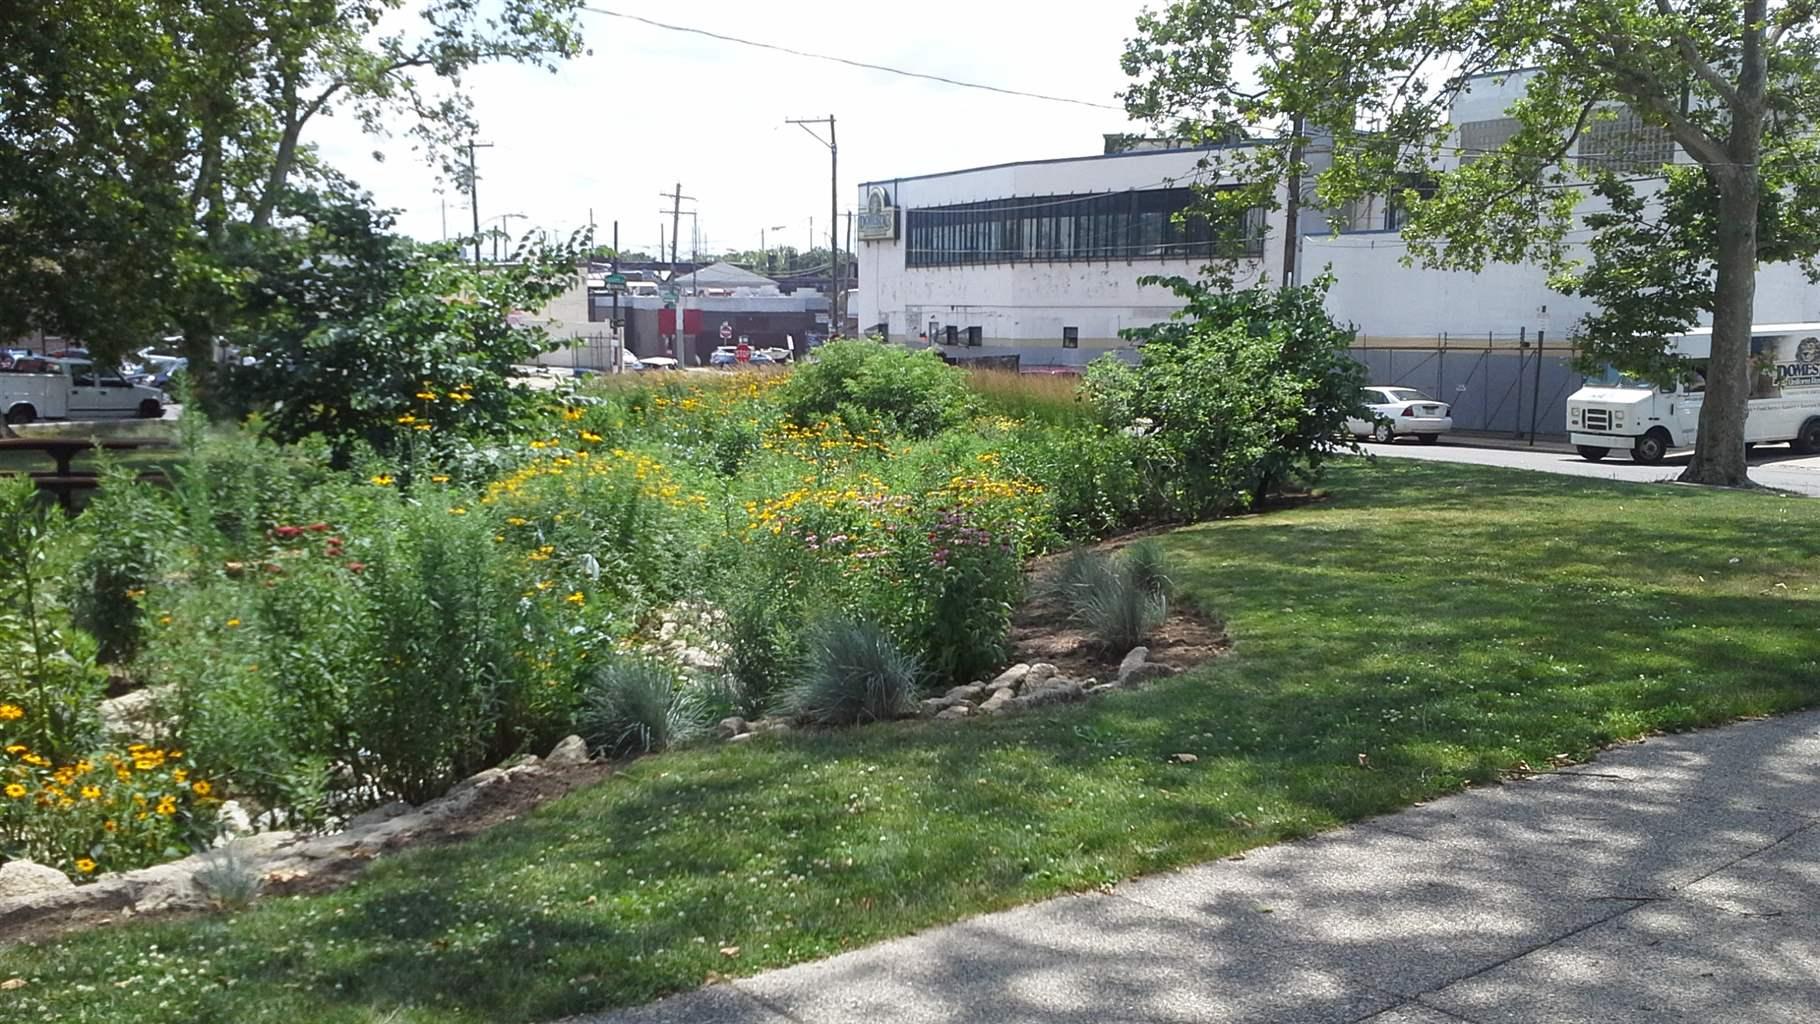 A concentrated area of landscaped bushes and stones sits in a slight depression behind a sidewalk and a small grassy area. Two mature trees are visible in the background, as is a roadway, a couple of vehicles, and a white-and-grey industrial building.  Credit: New Jersey Future